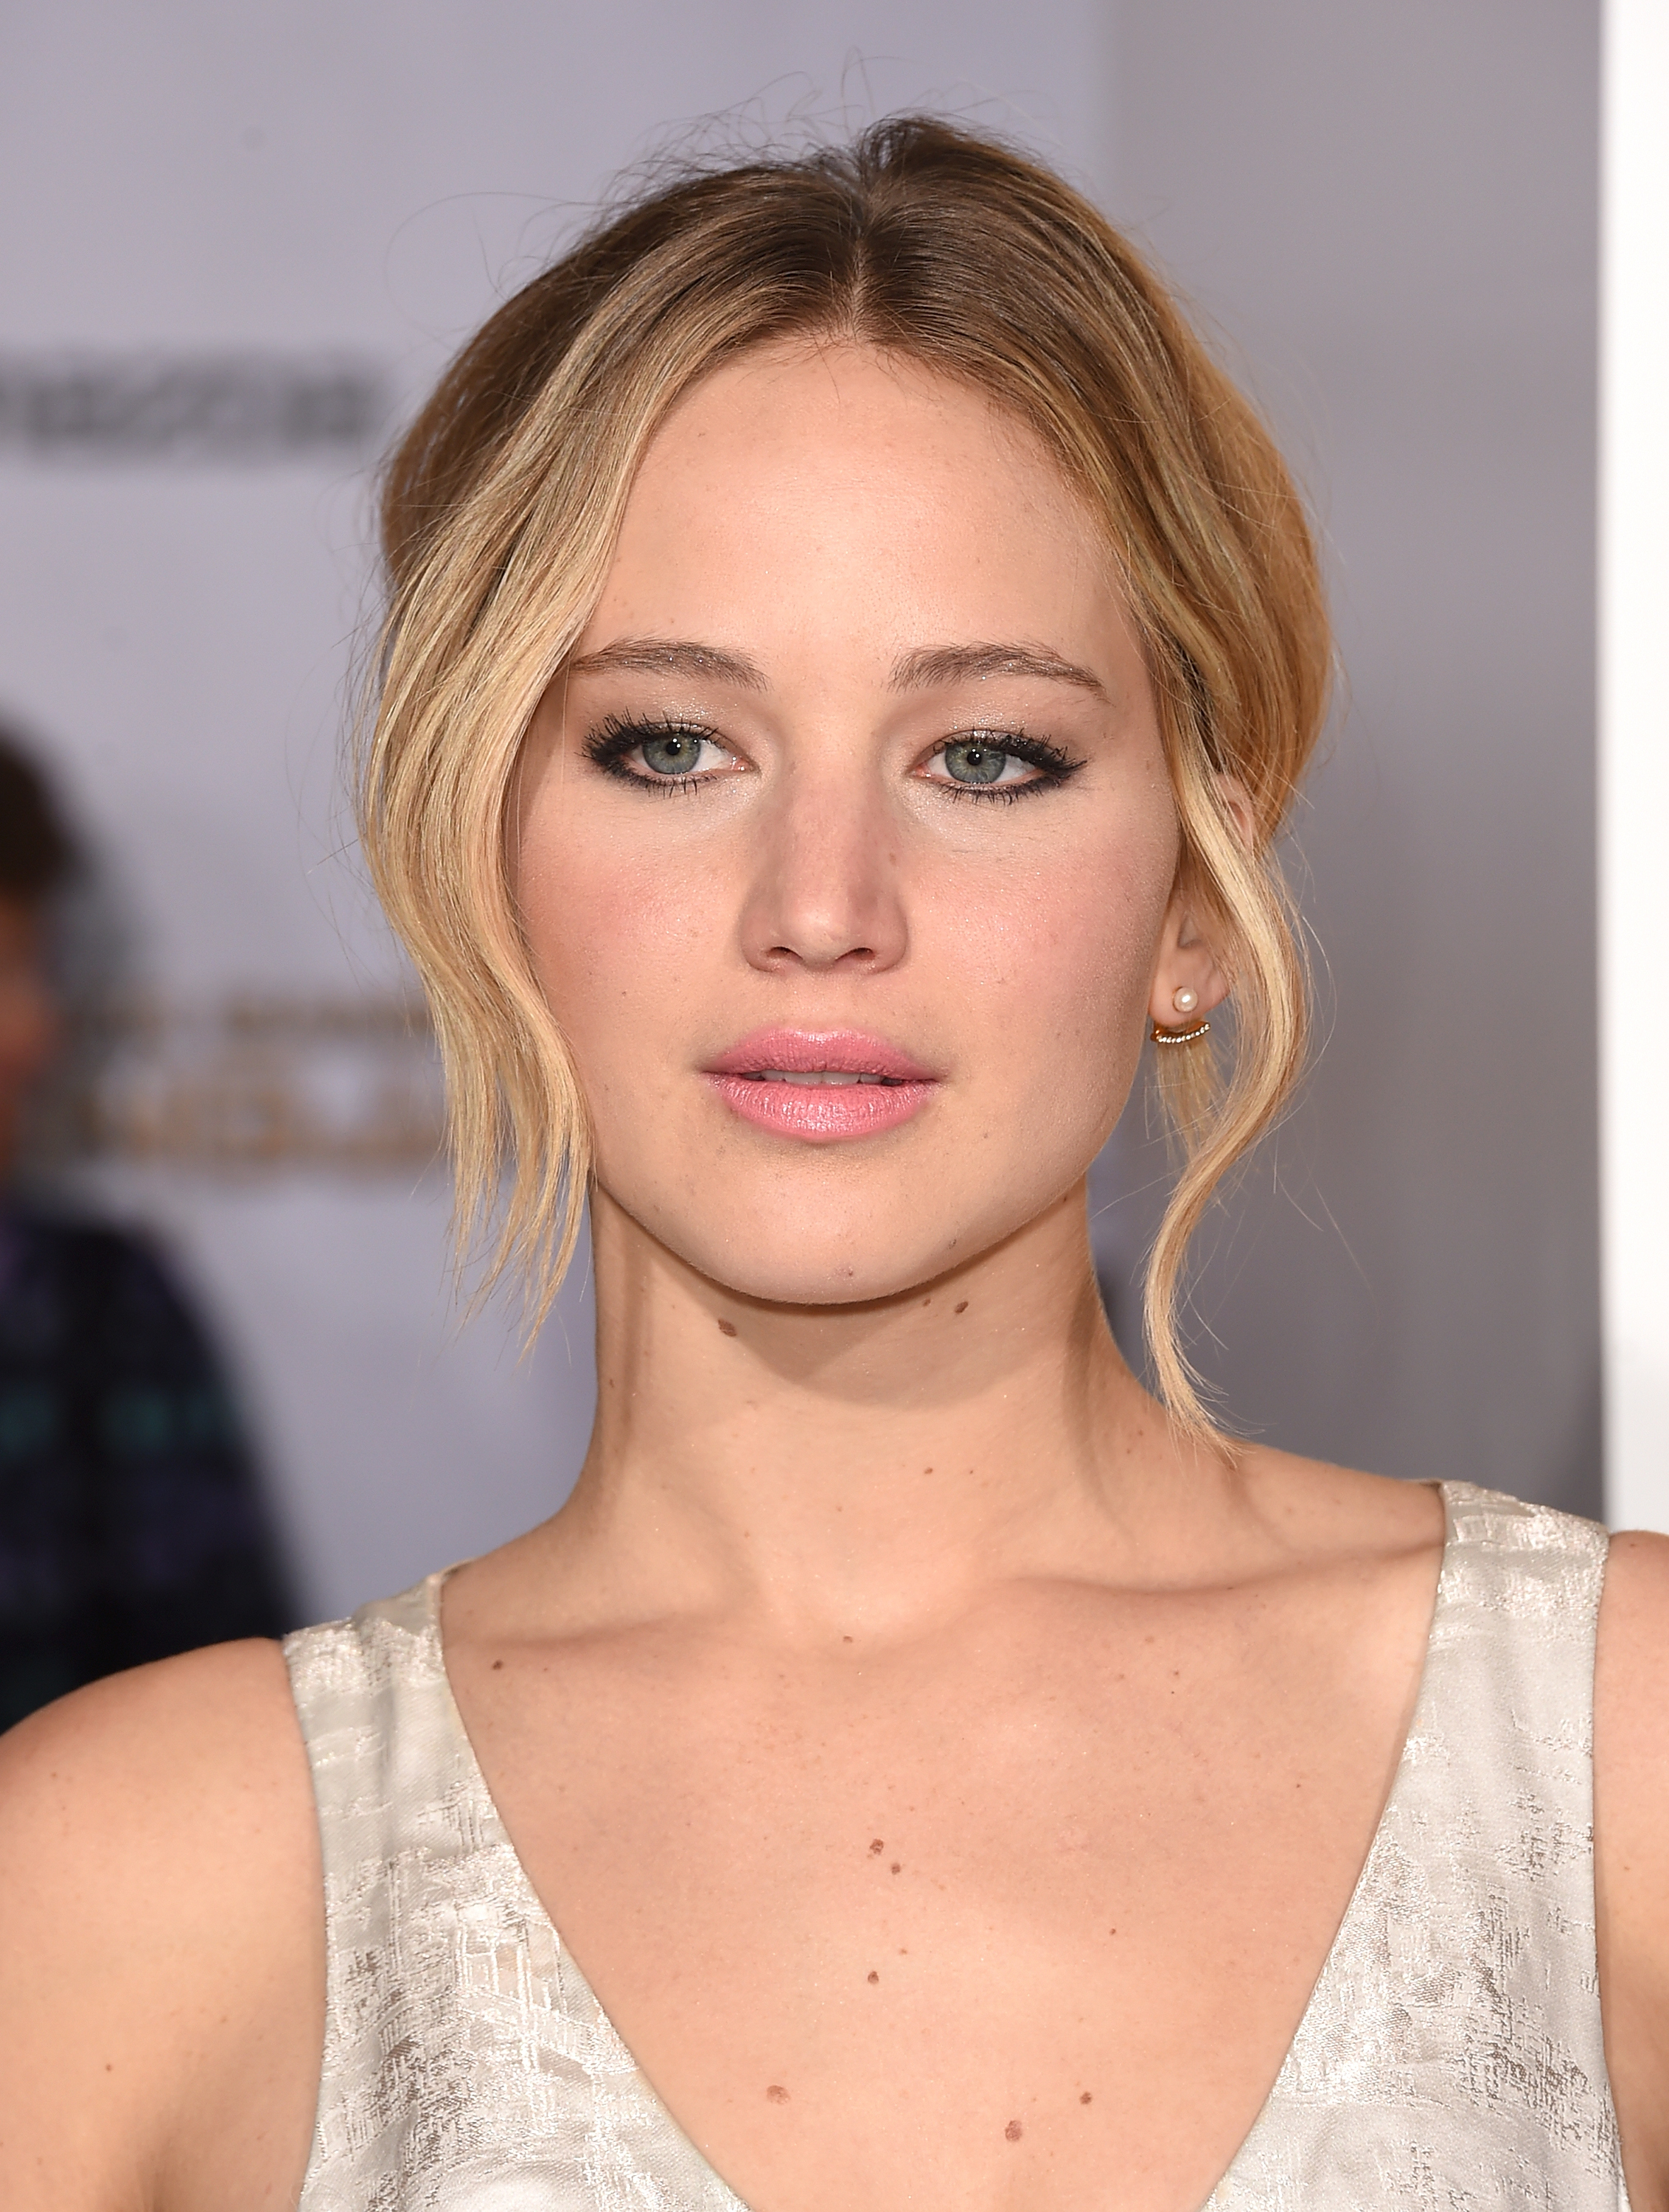 Jennifer Lawrence attends the premiere of 'The Hunger Games: Mockingjay - Part 1' on Nov. 17, 2014 in Los Angeles, California.